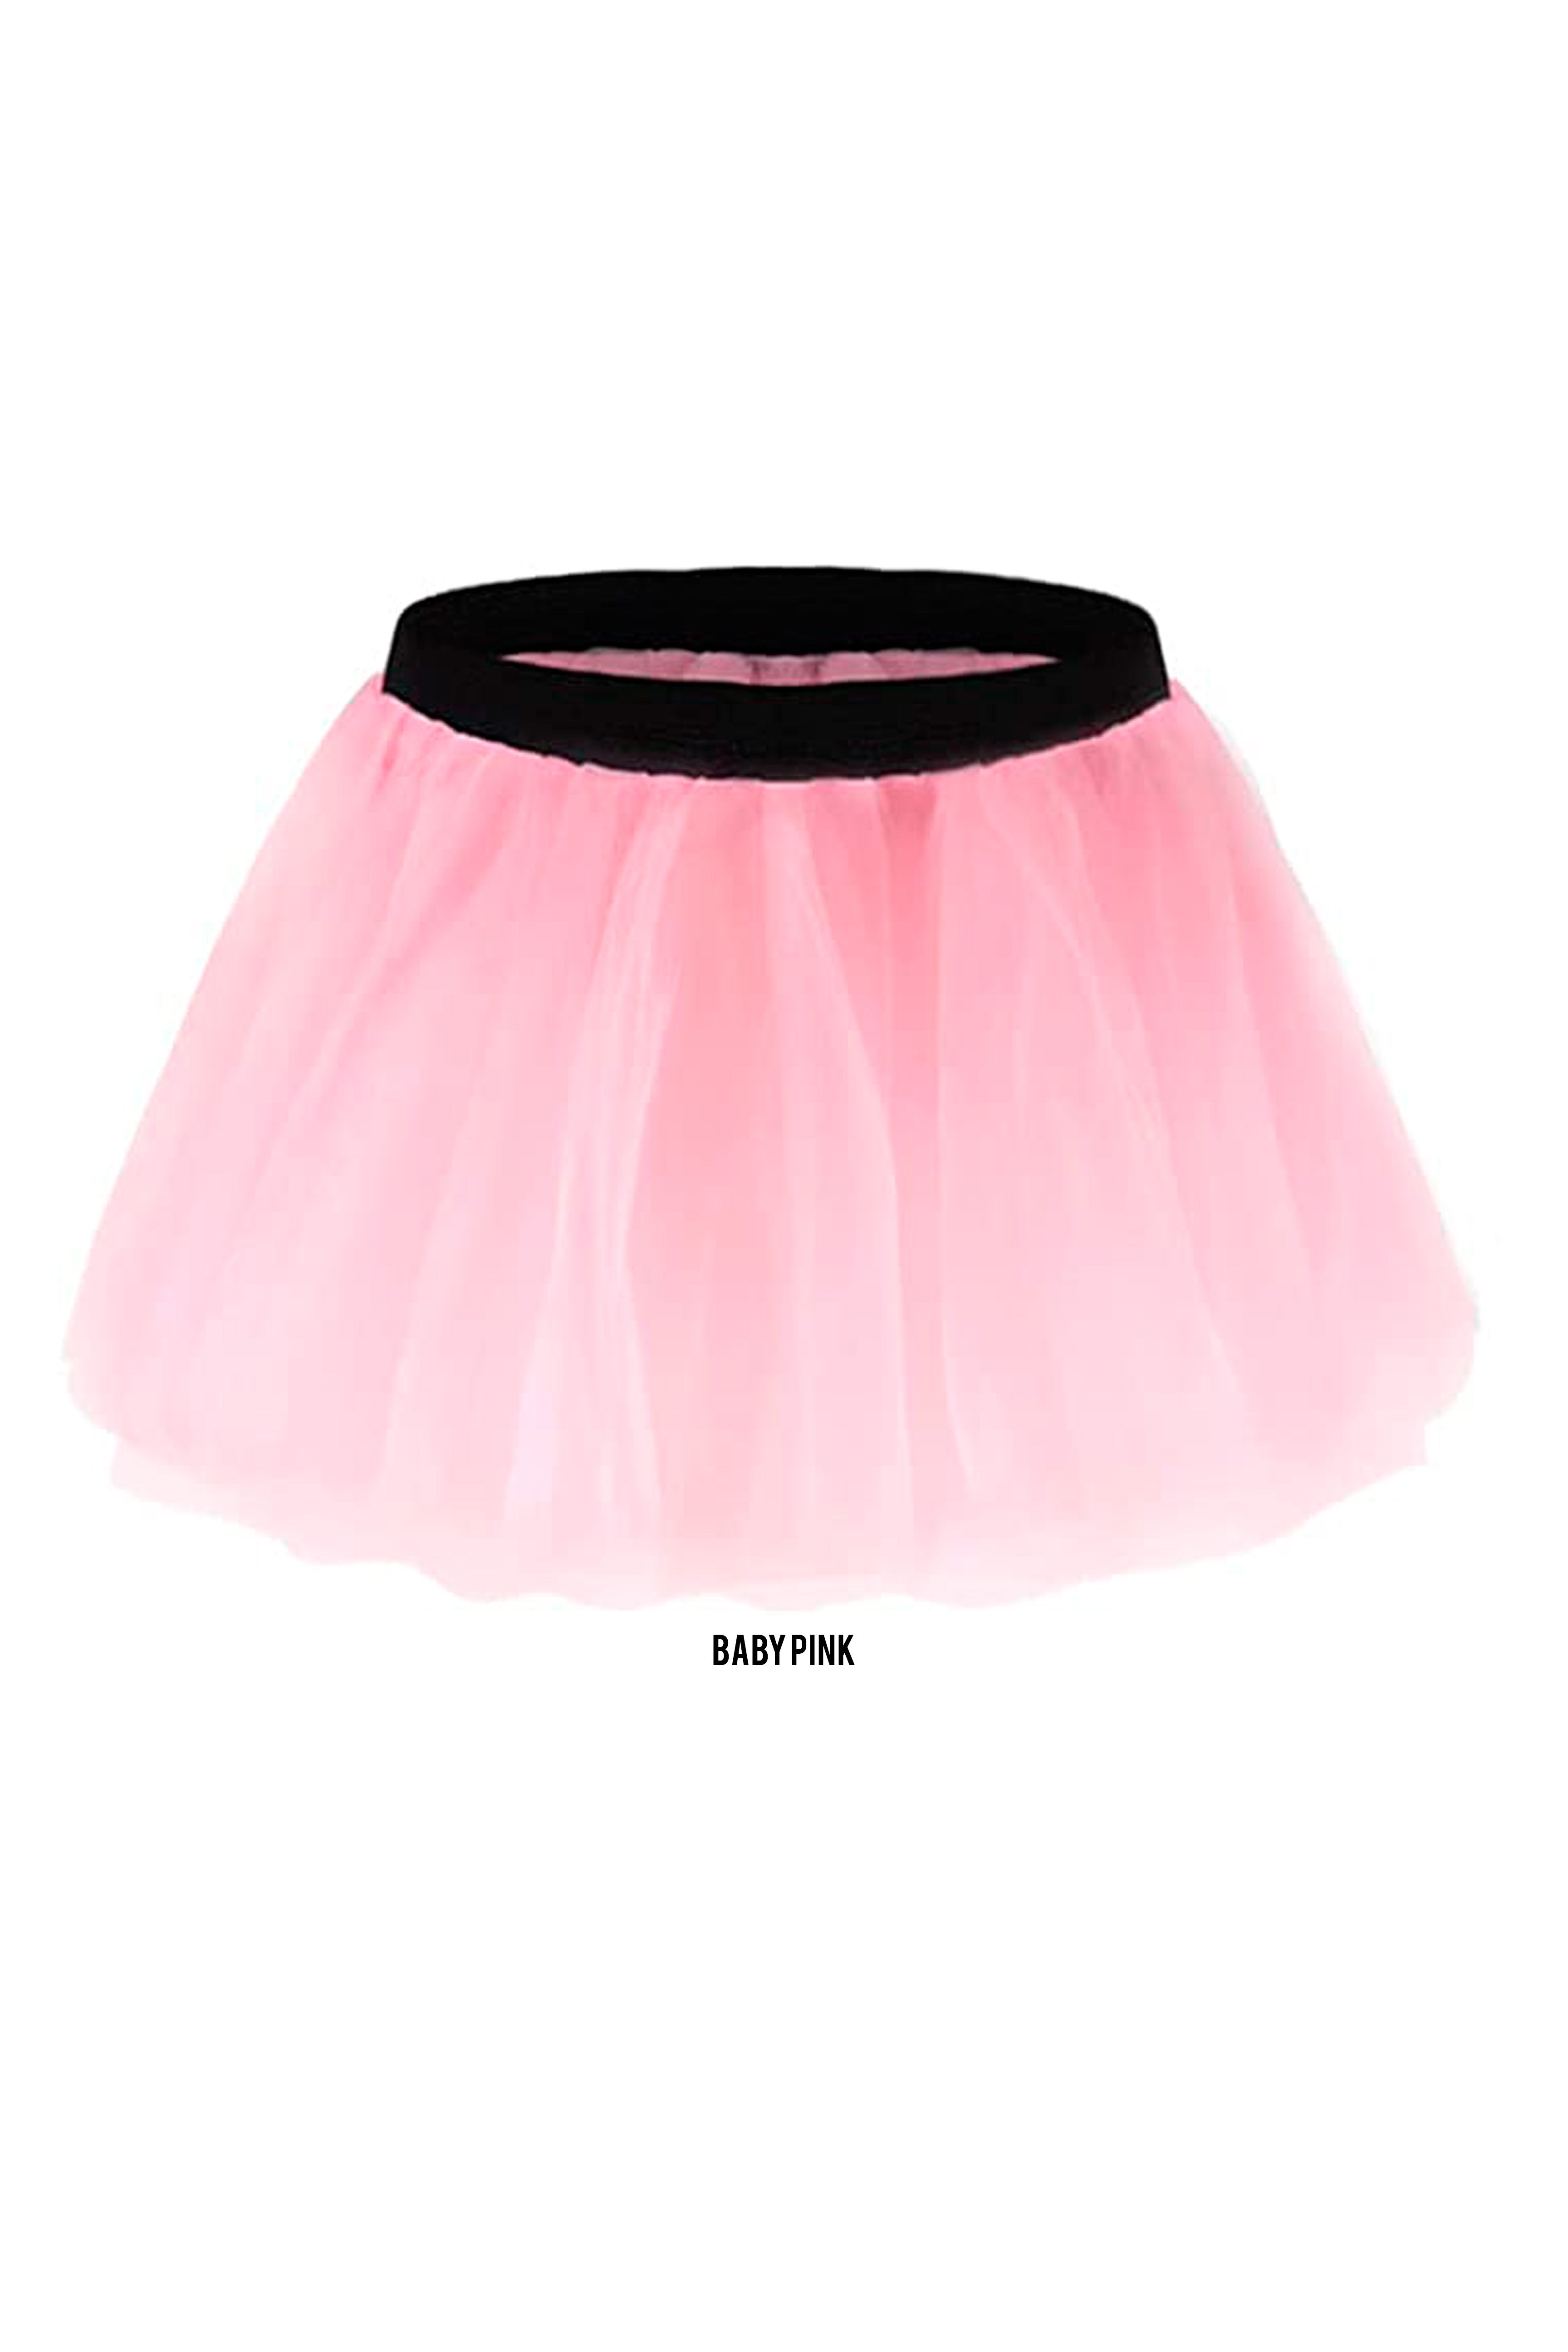 Pink Tutu (2 colors available!)